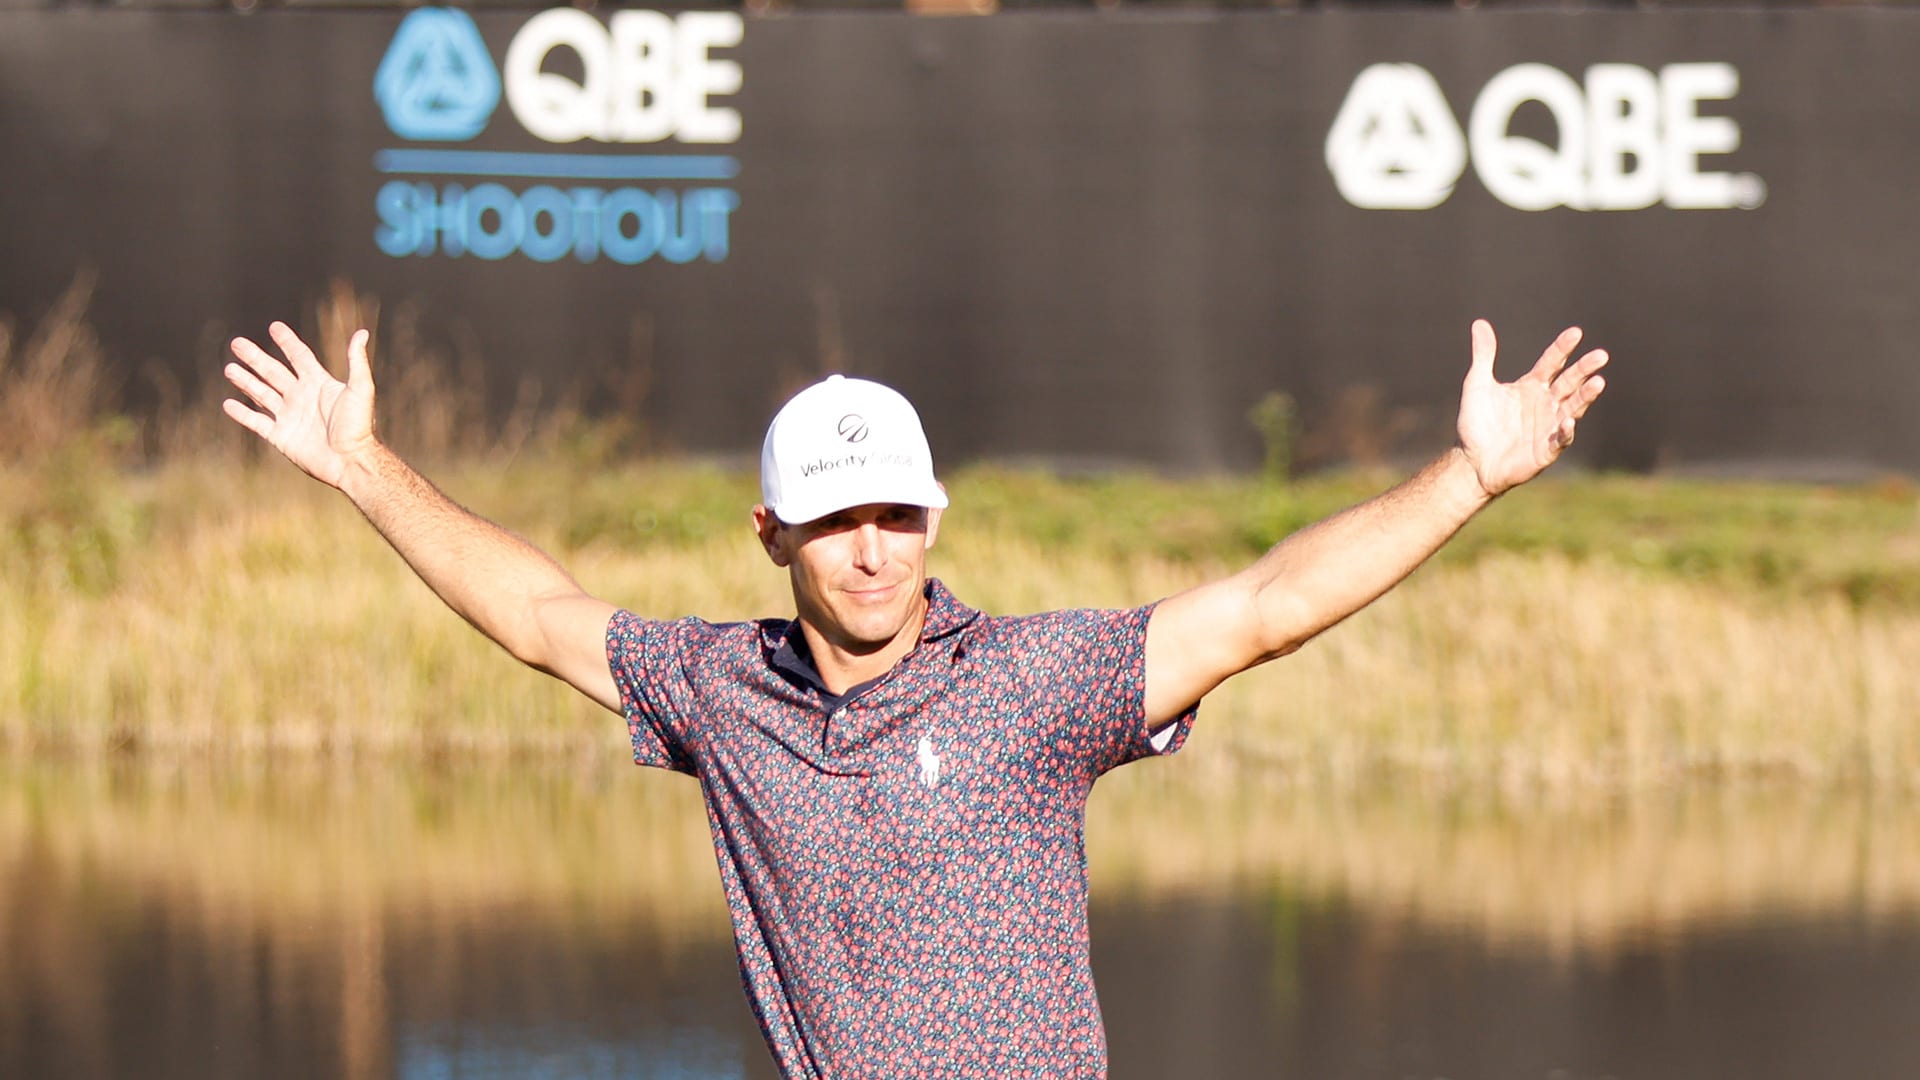 How to watch: Live stream schedule for QBE Shootout, Alfred Dunhill Championship